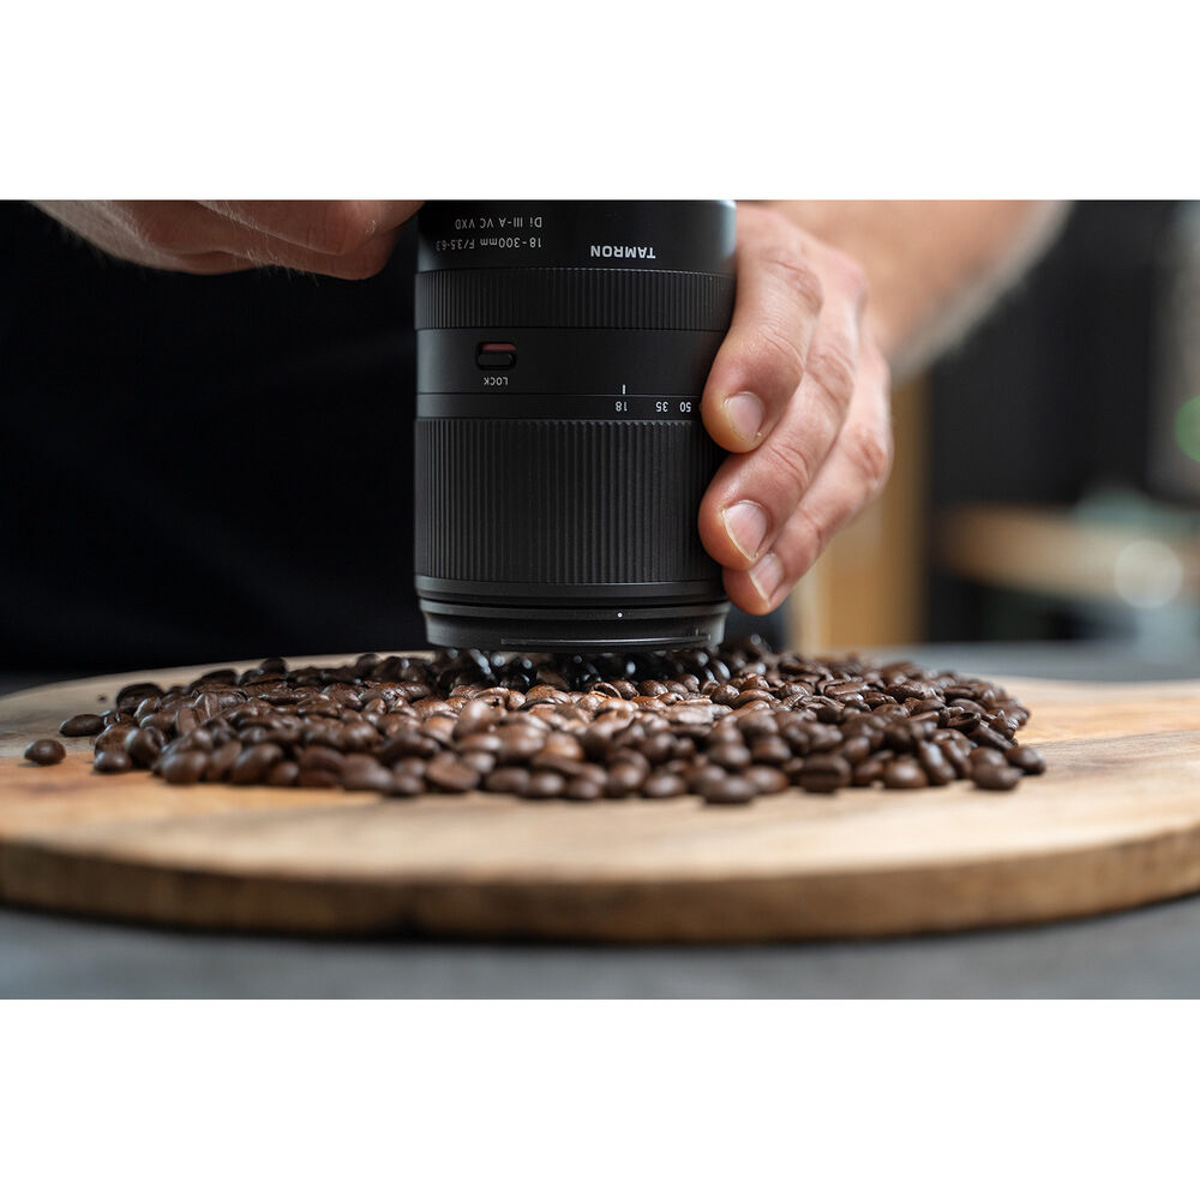 Tamron 18-300mm F/3.5-6.3 Di III-A VC VXD Lens for Sony E - The